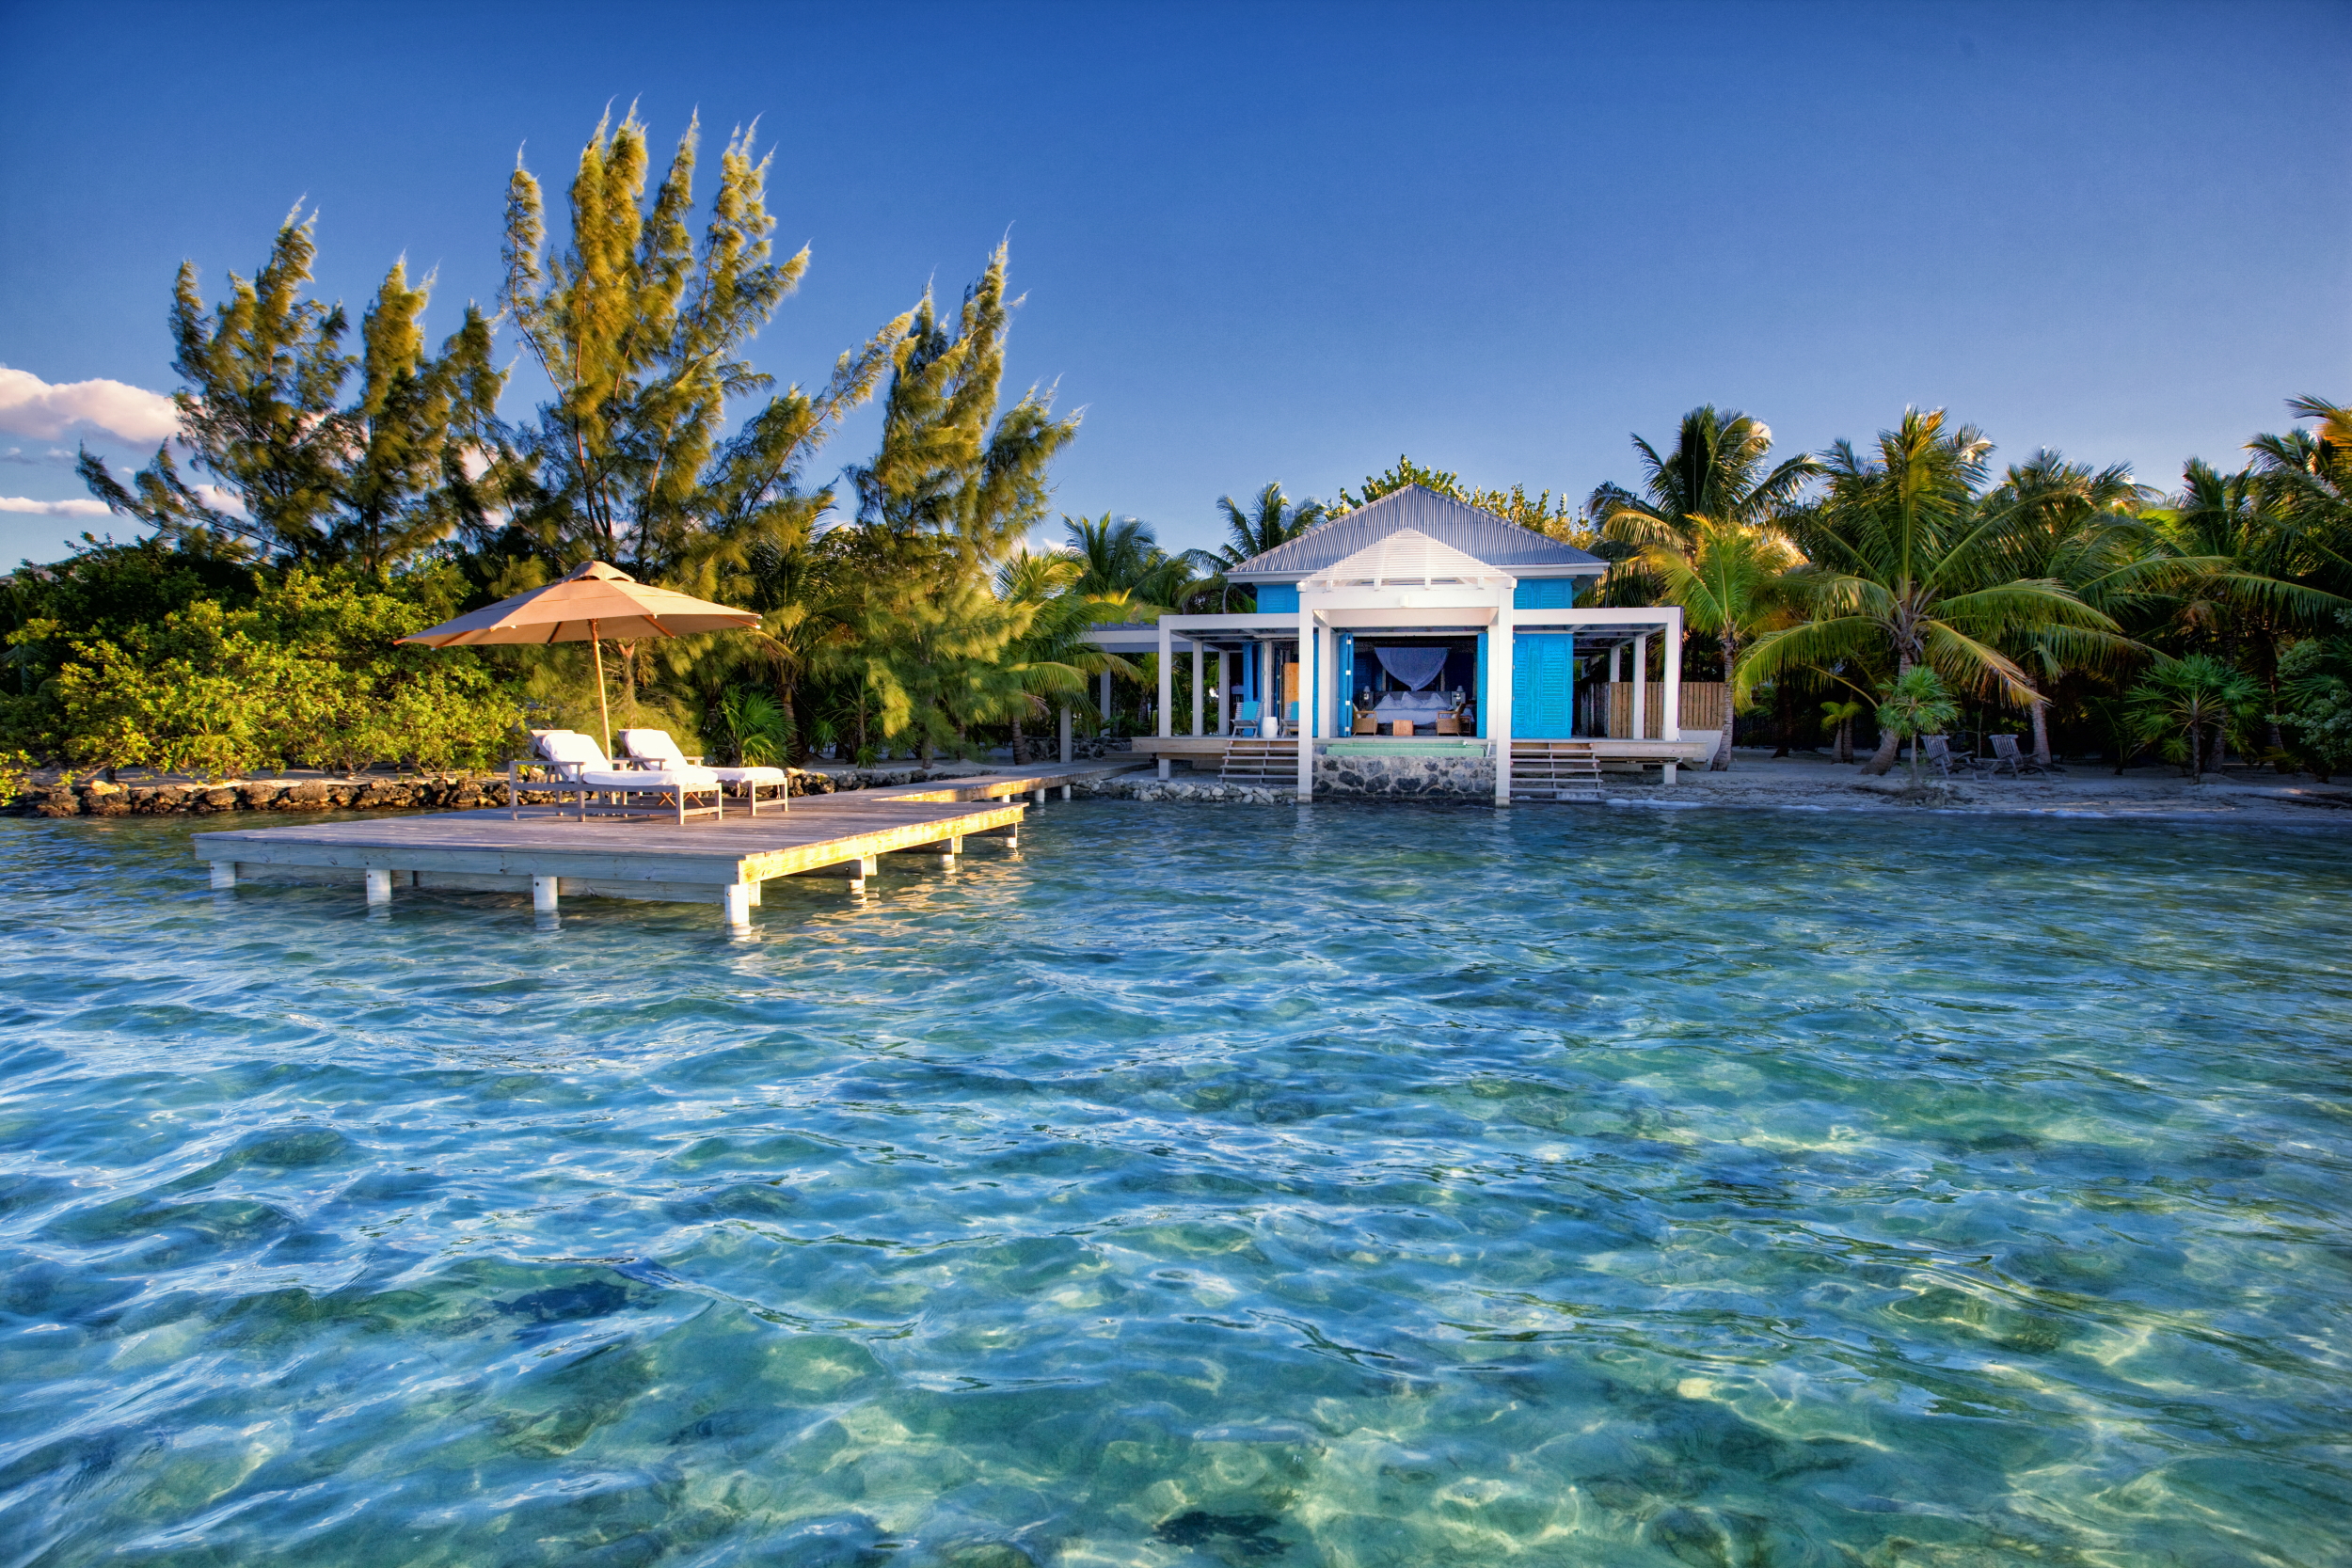 Seeking Professional Advice: Engaging a Real Estate Agent Specializing in Private Islands